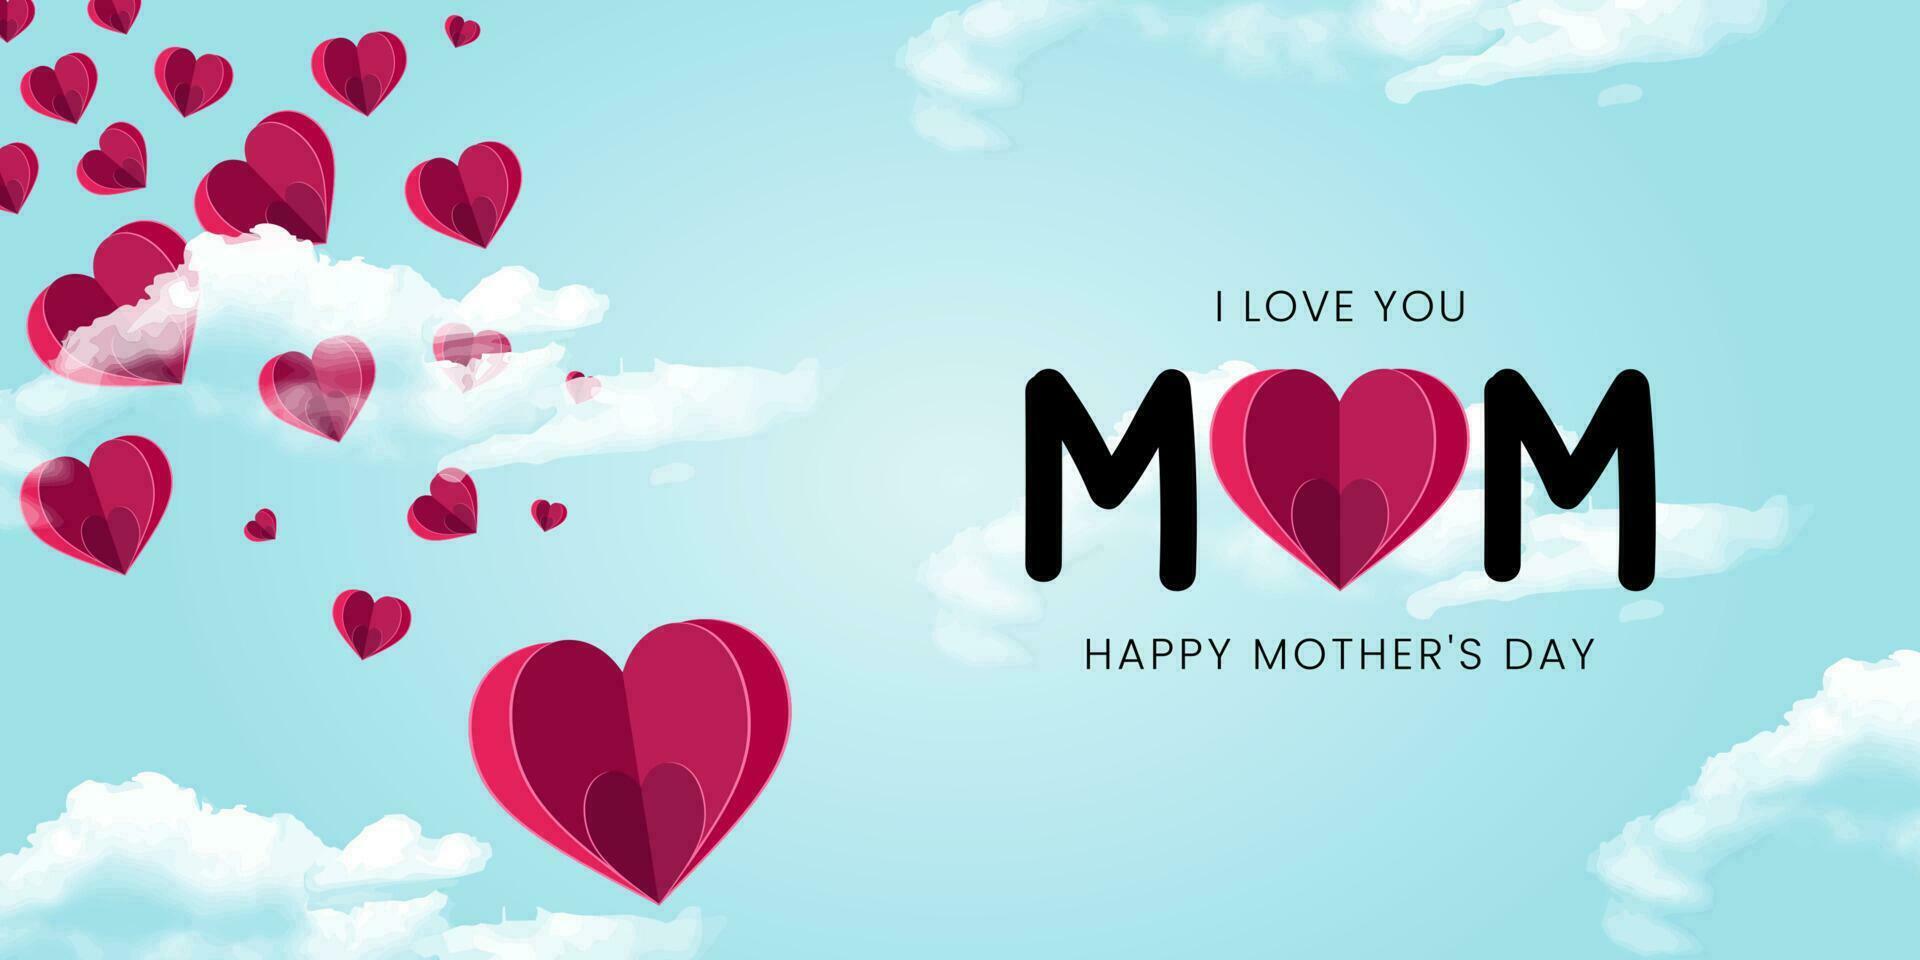 Mother postcard with paper flying elements, mom and realistic clouds on blue sky background. Vector symbols of love in shape of heart for Happy Mother's Day greeting card design